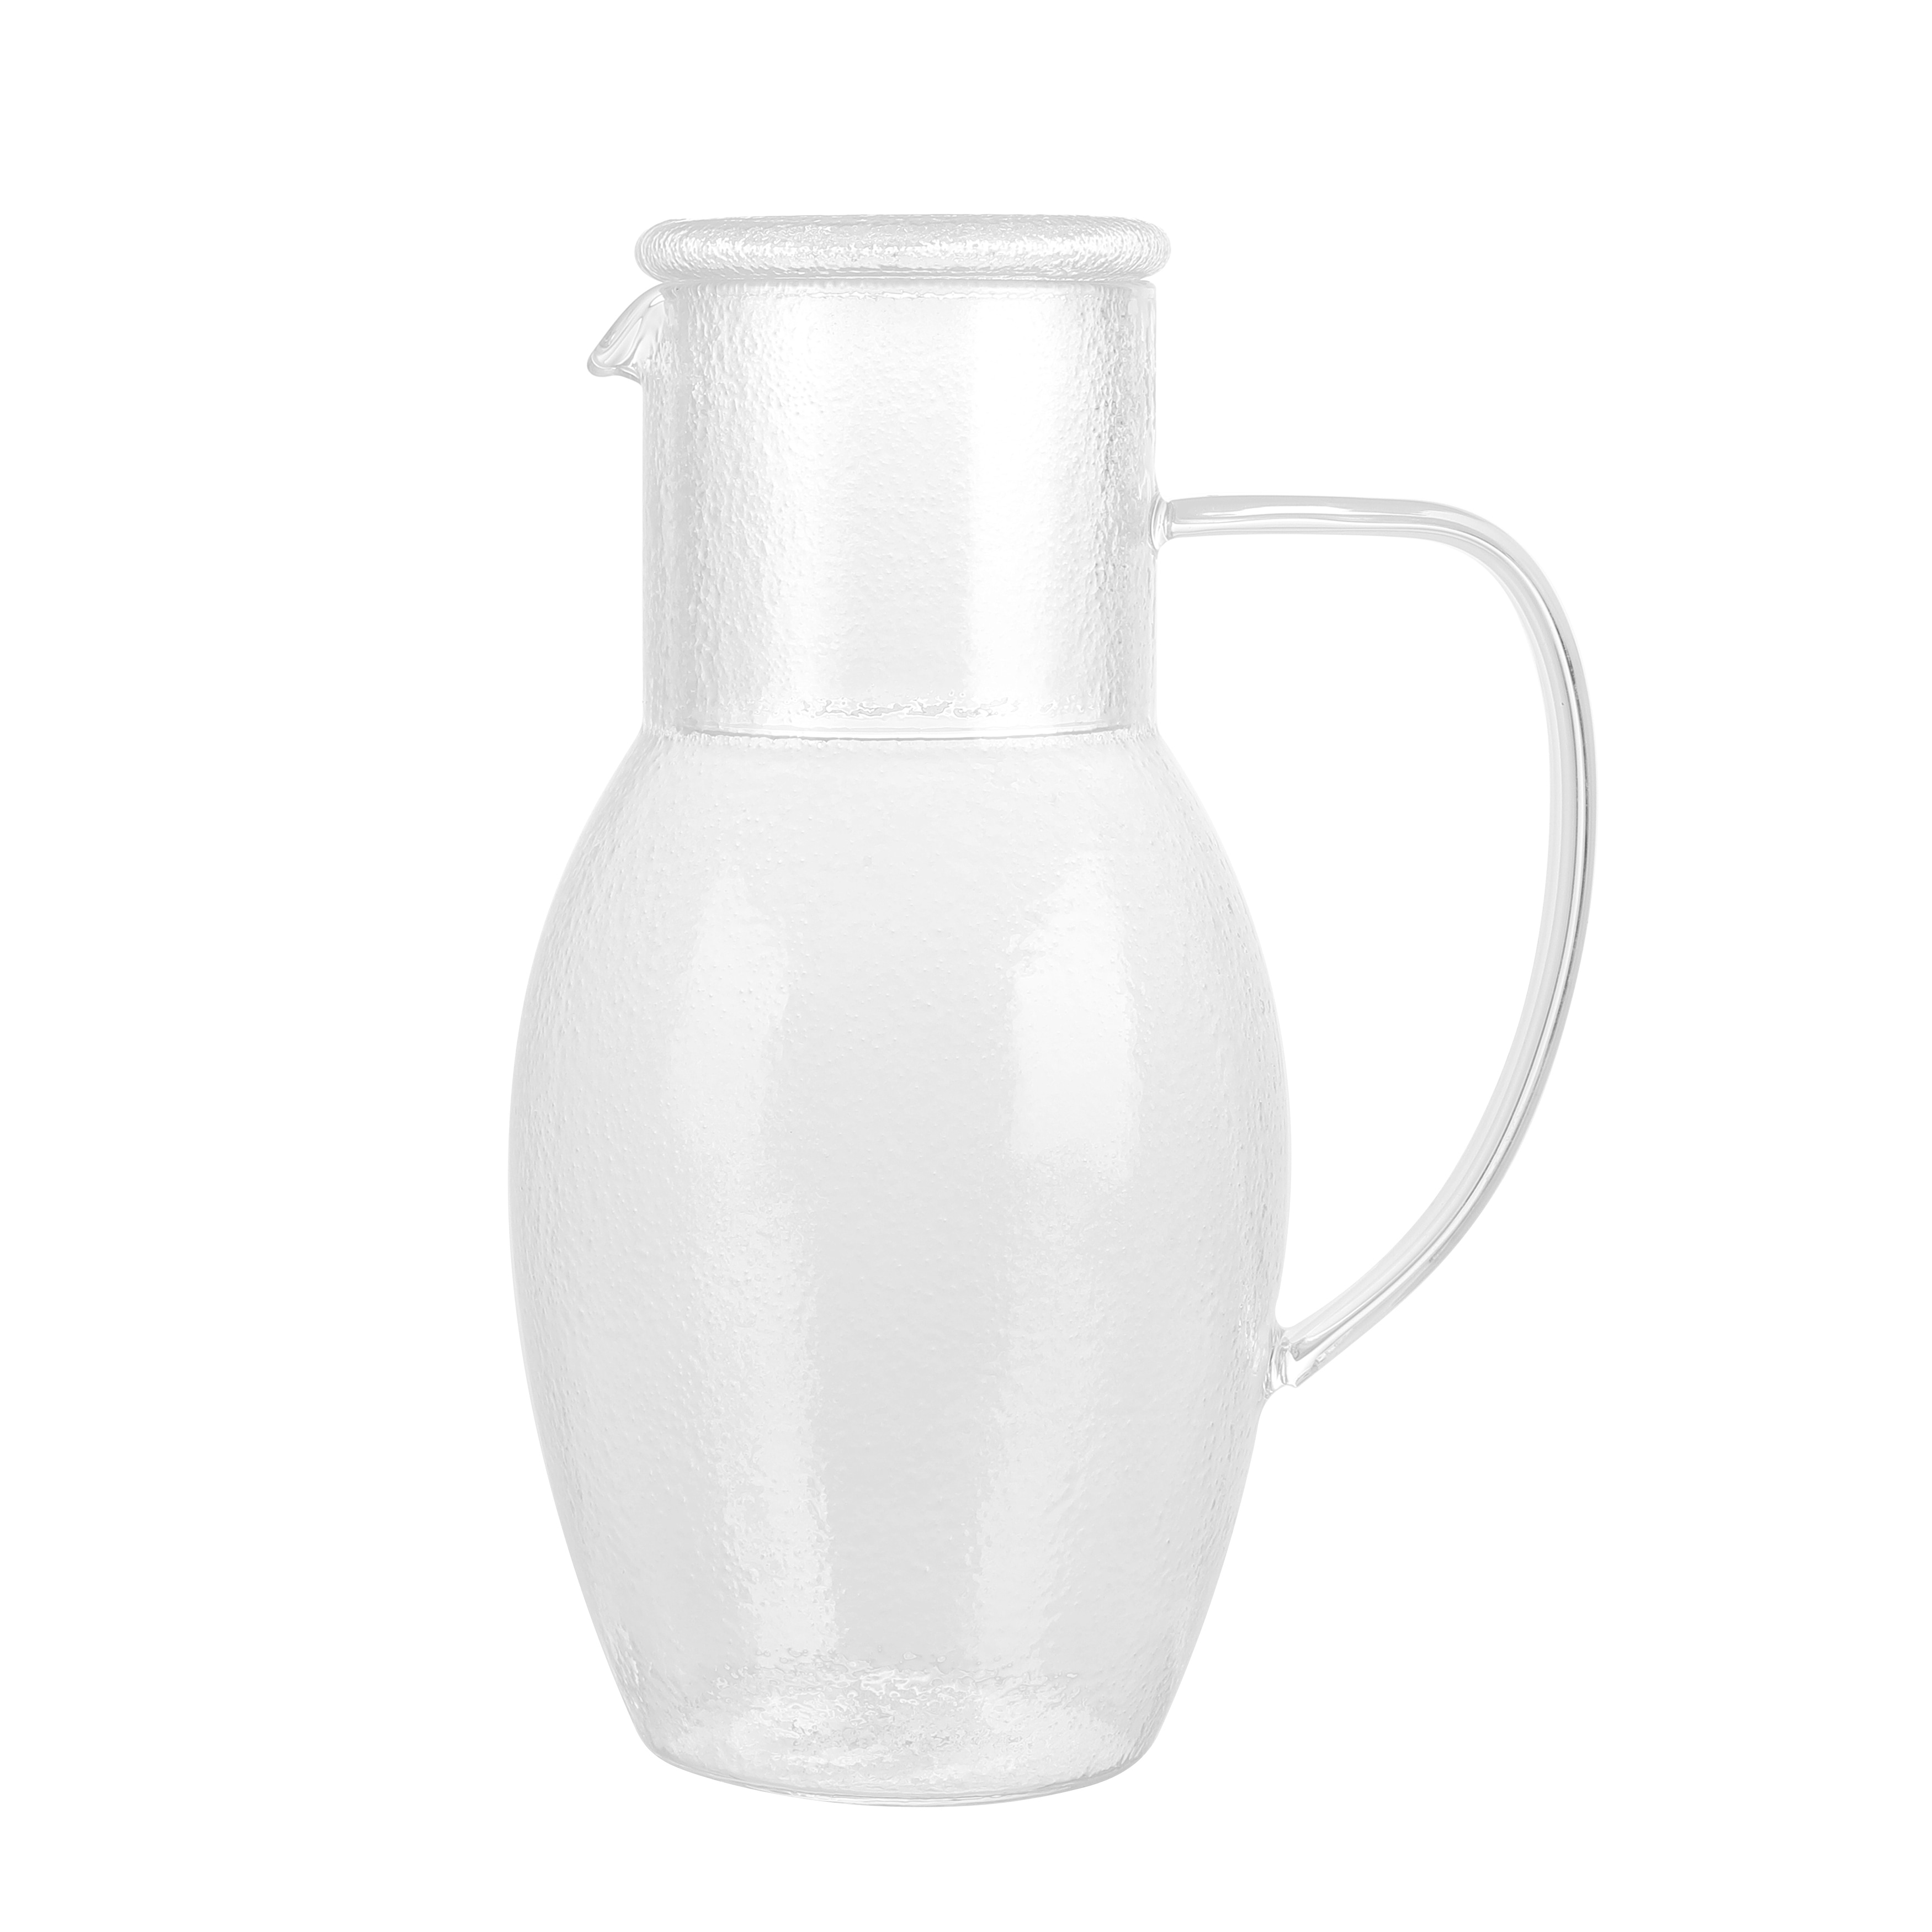 Set of 2 Glass Carafe with Lids, 32 Oz Water Pitcher Beverage